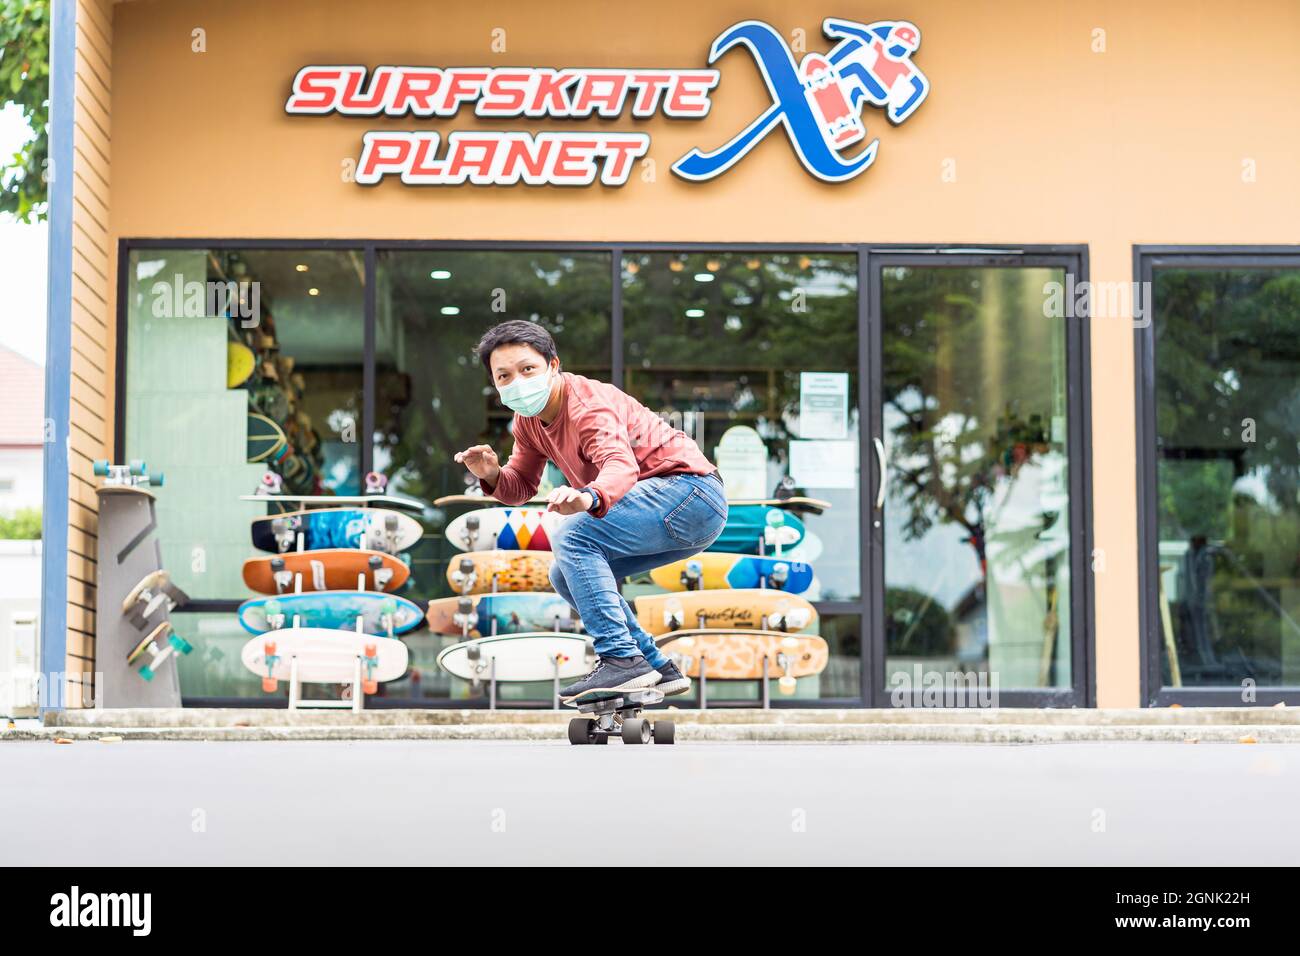 Asian Cheerful man playing surfskate or skateboard in front turn action  over the surfskate planet x store sop at bangkok, Thailand extream sport,  hea Stock Photo - Alamy